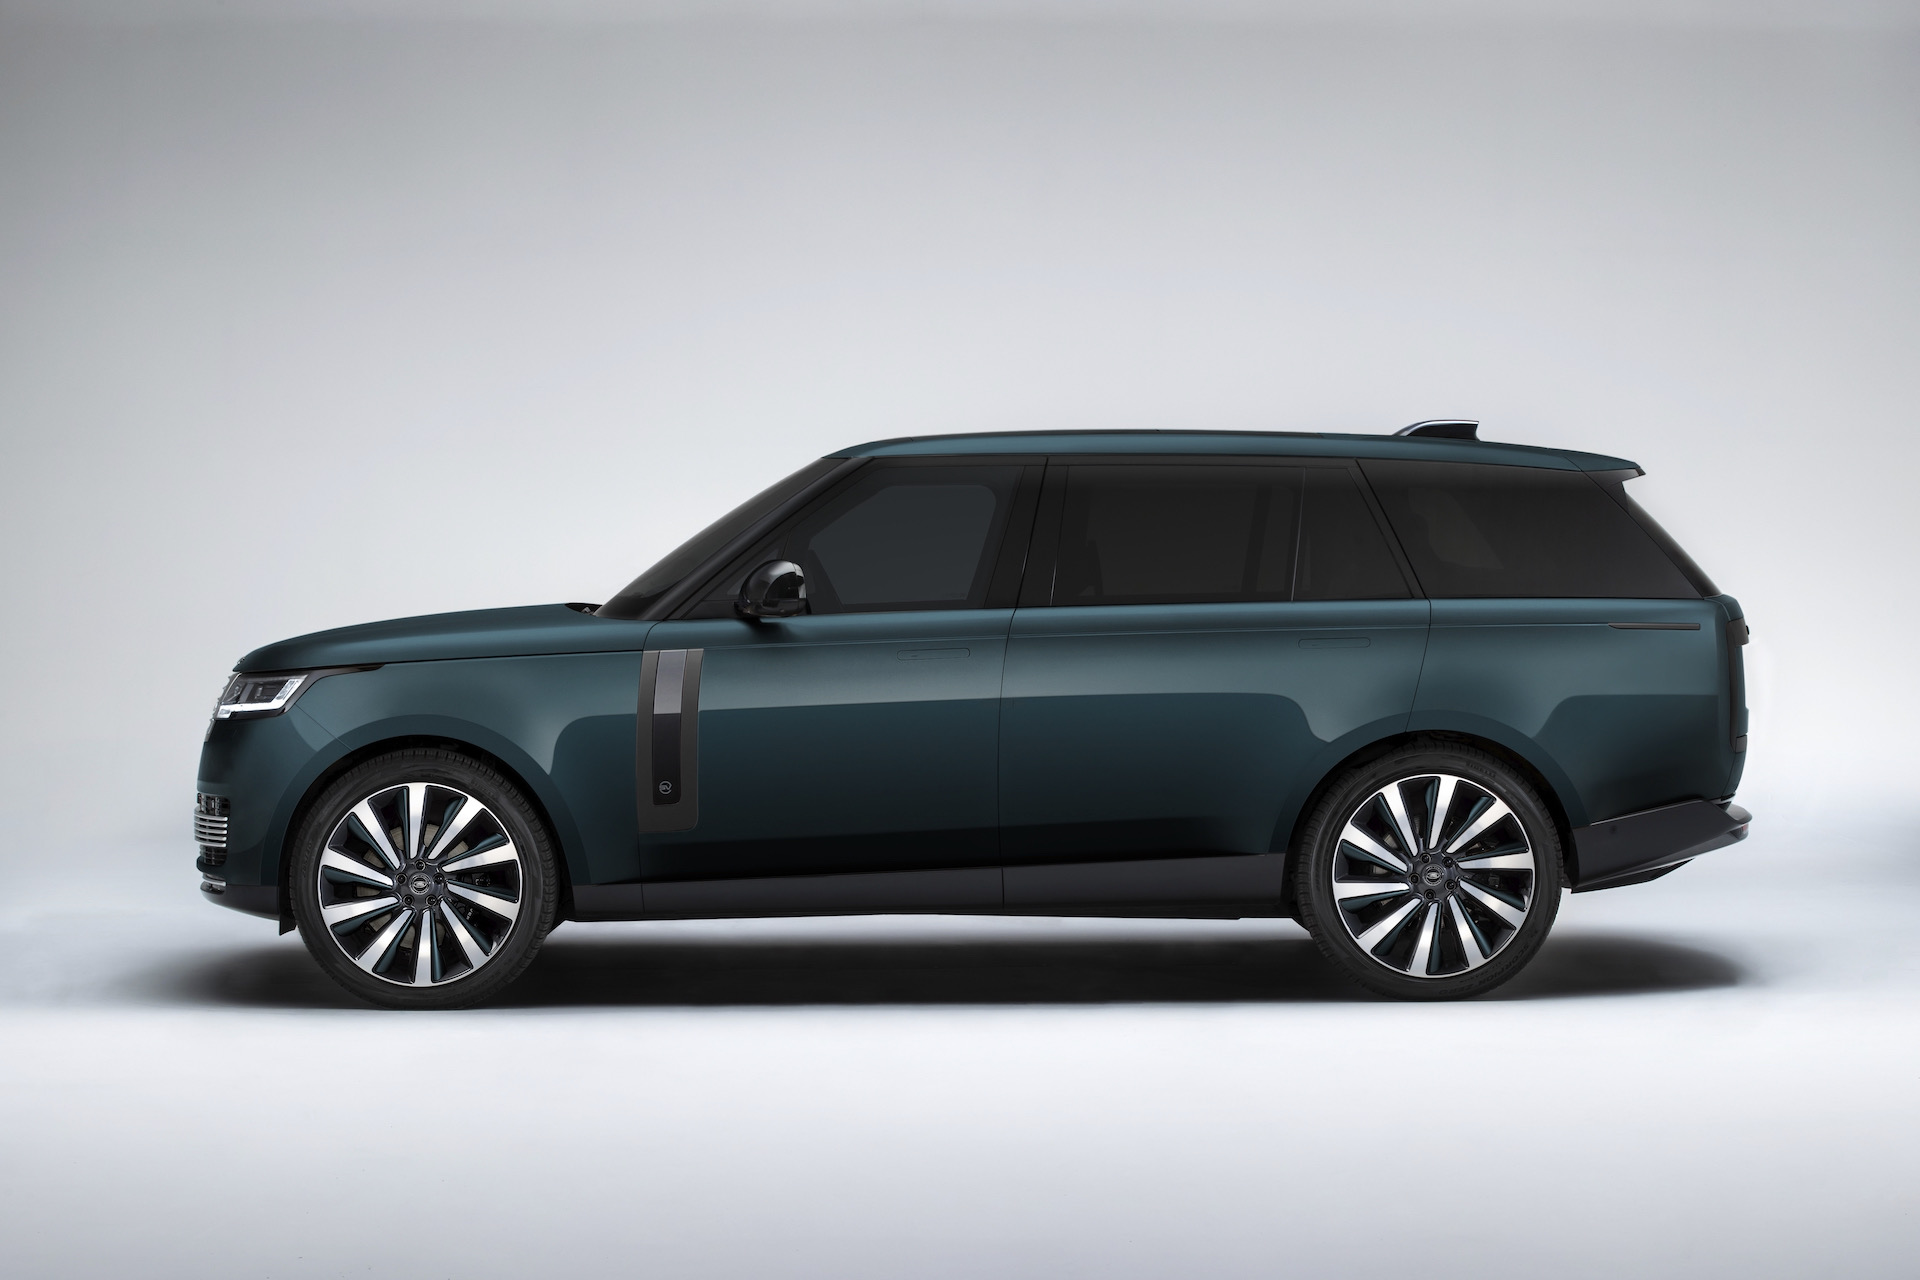 JLR adds PHEV and expands SV Bespoke options for new Range Rover